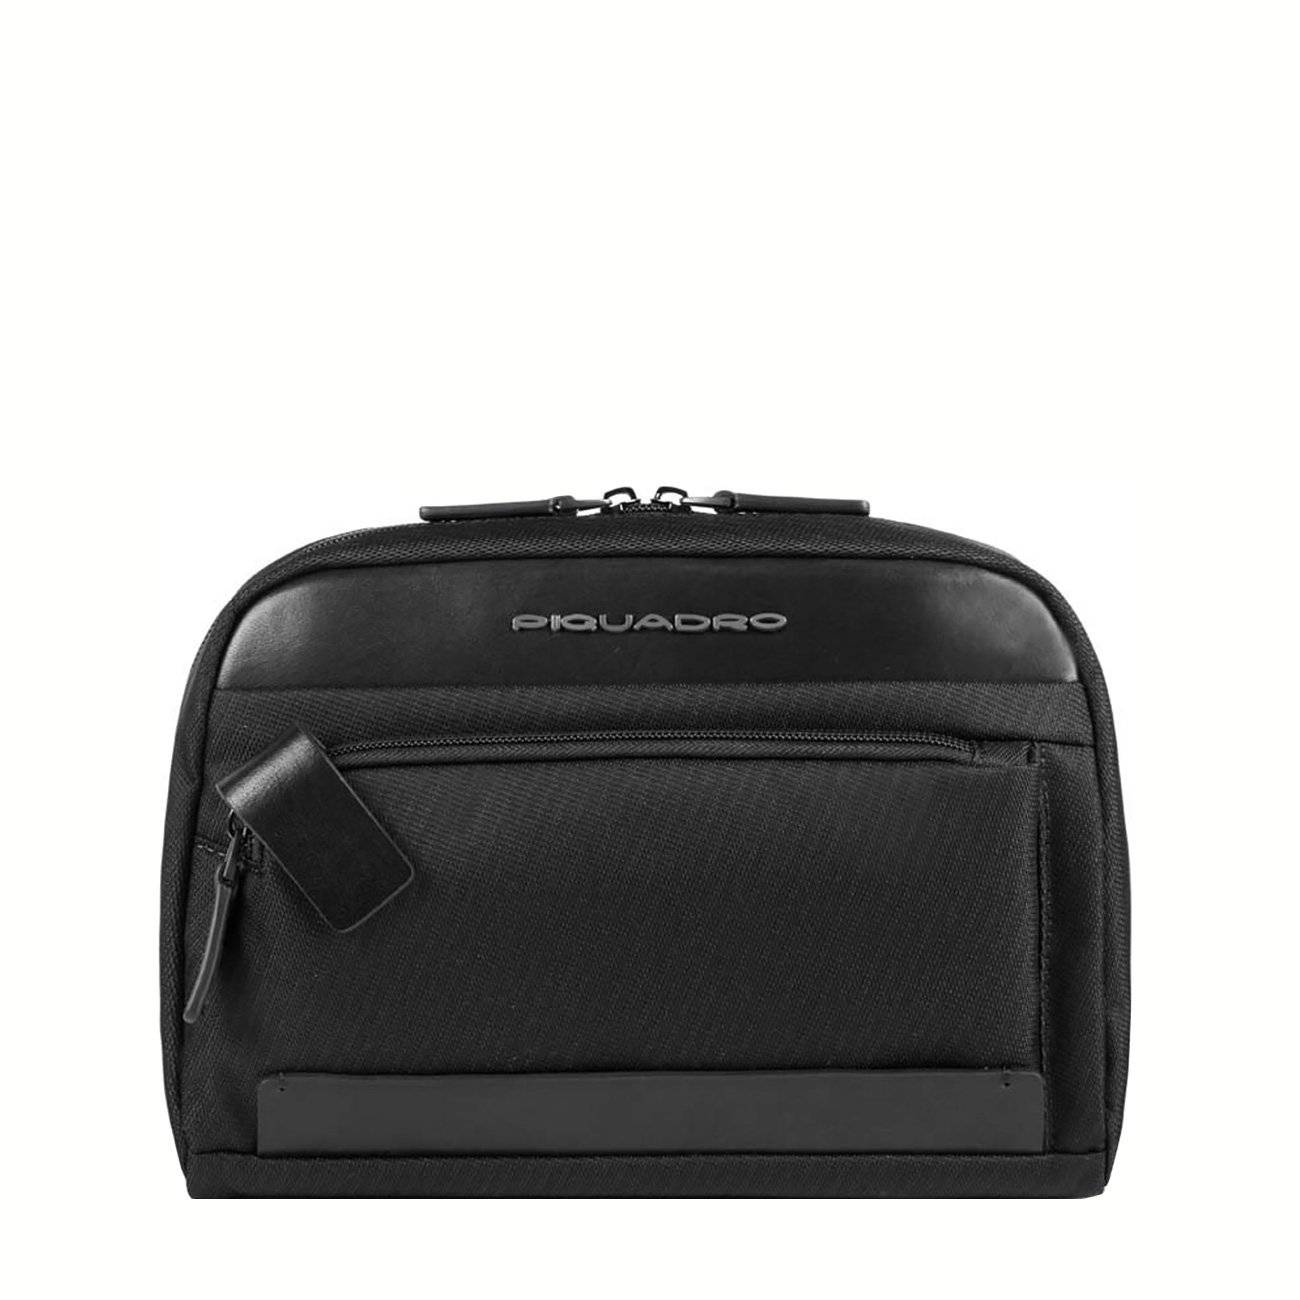 KLOUT TOILETRY BAG